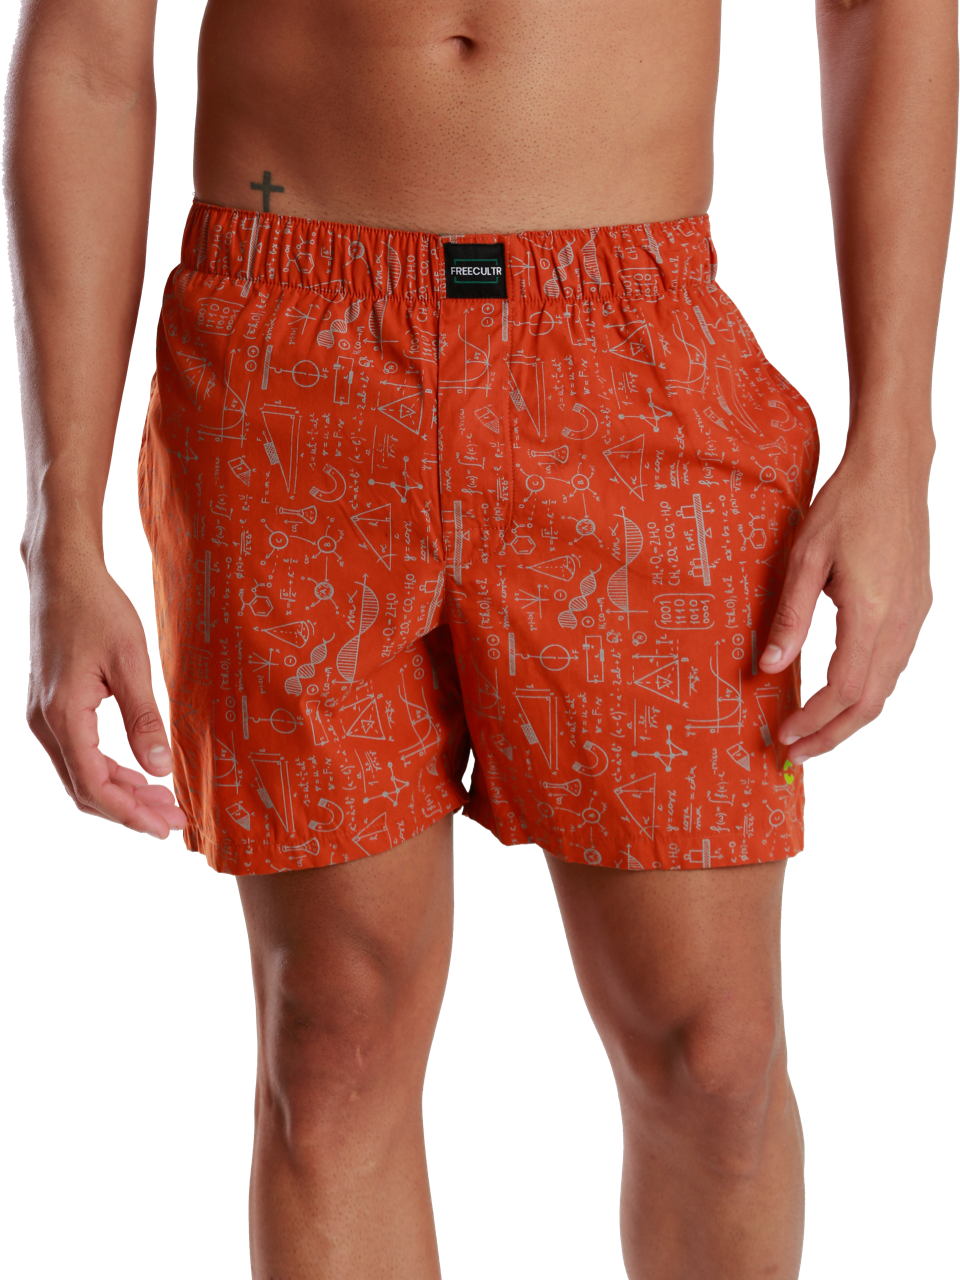 All-Day Printed Boxer Shorts For Men - (Pack of 3)